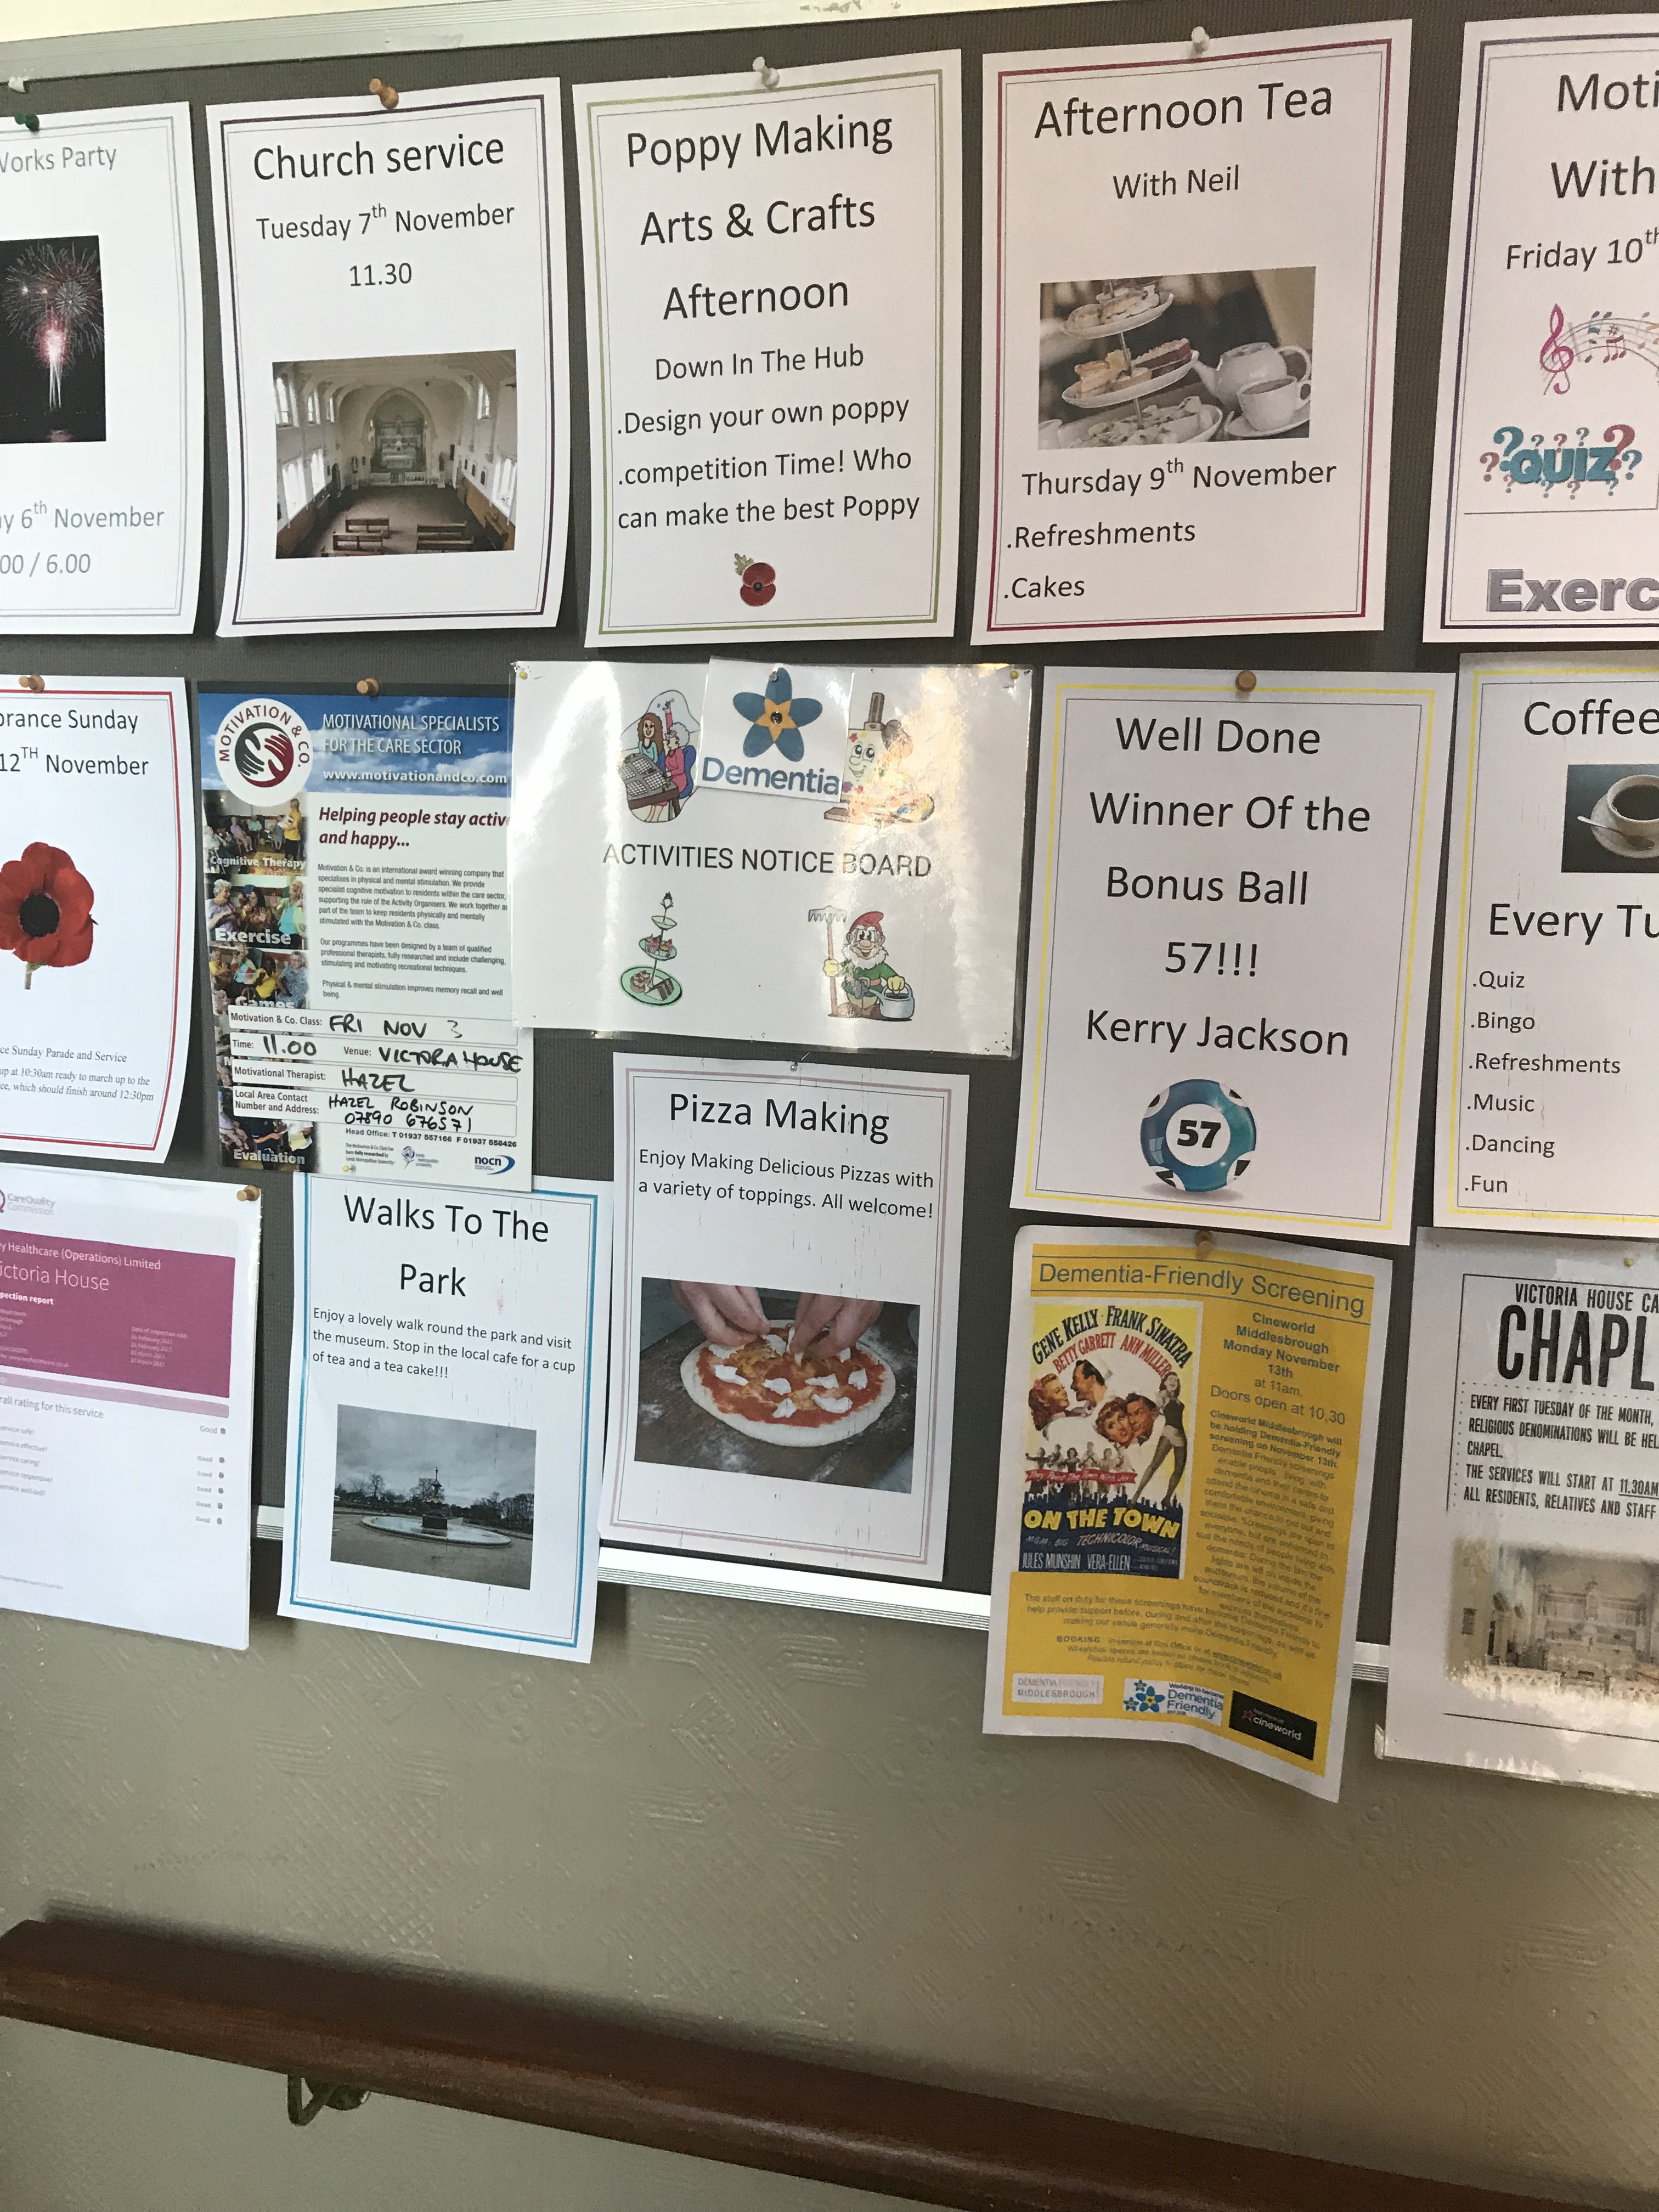 Activities Notice Board at Victoria House Care Centre Nov 2017: Key Healthcare is dedicated to caring for elderly residents in safe. We have multiple dementia care homes including our care home middlesbrough, our care home St. Helen and care home saltburn. We excel in monitoring and improving care levels.